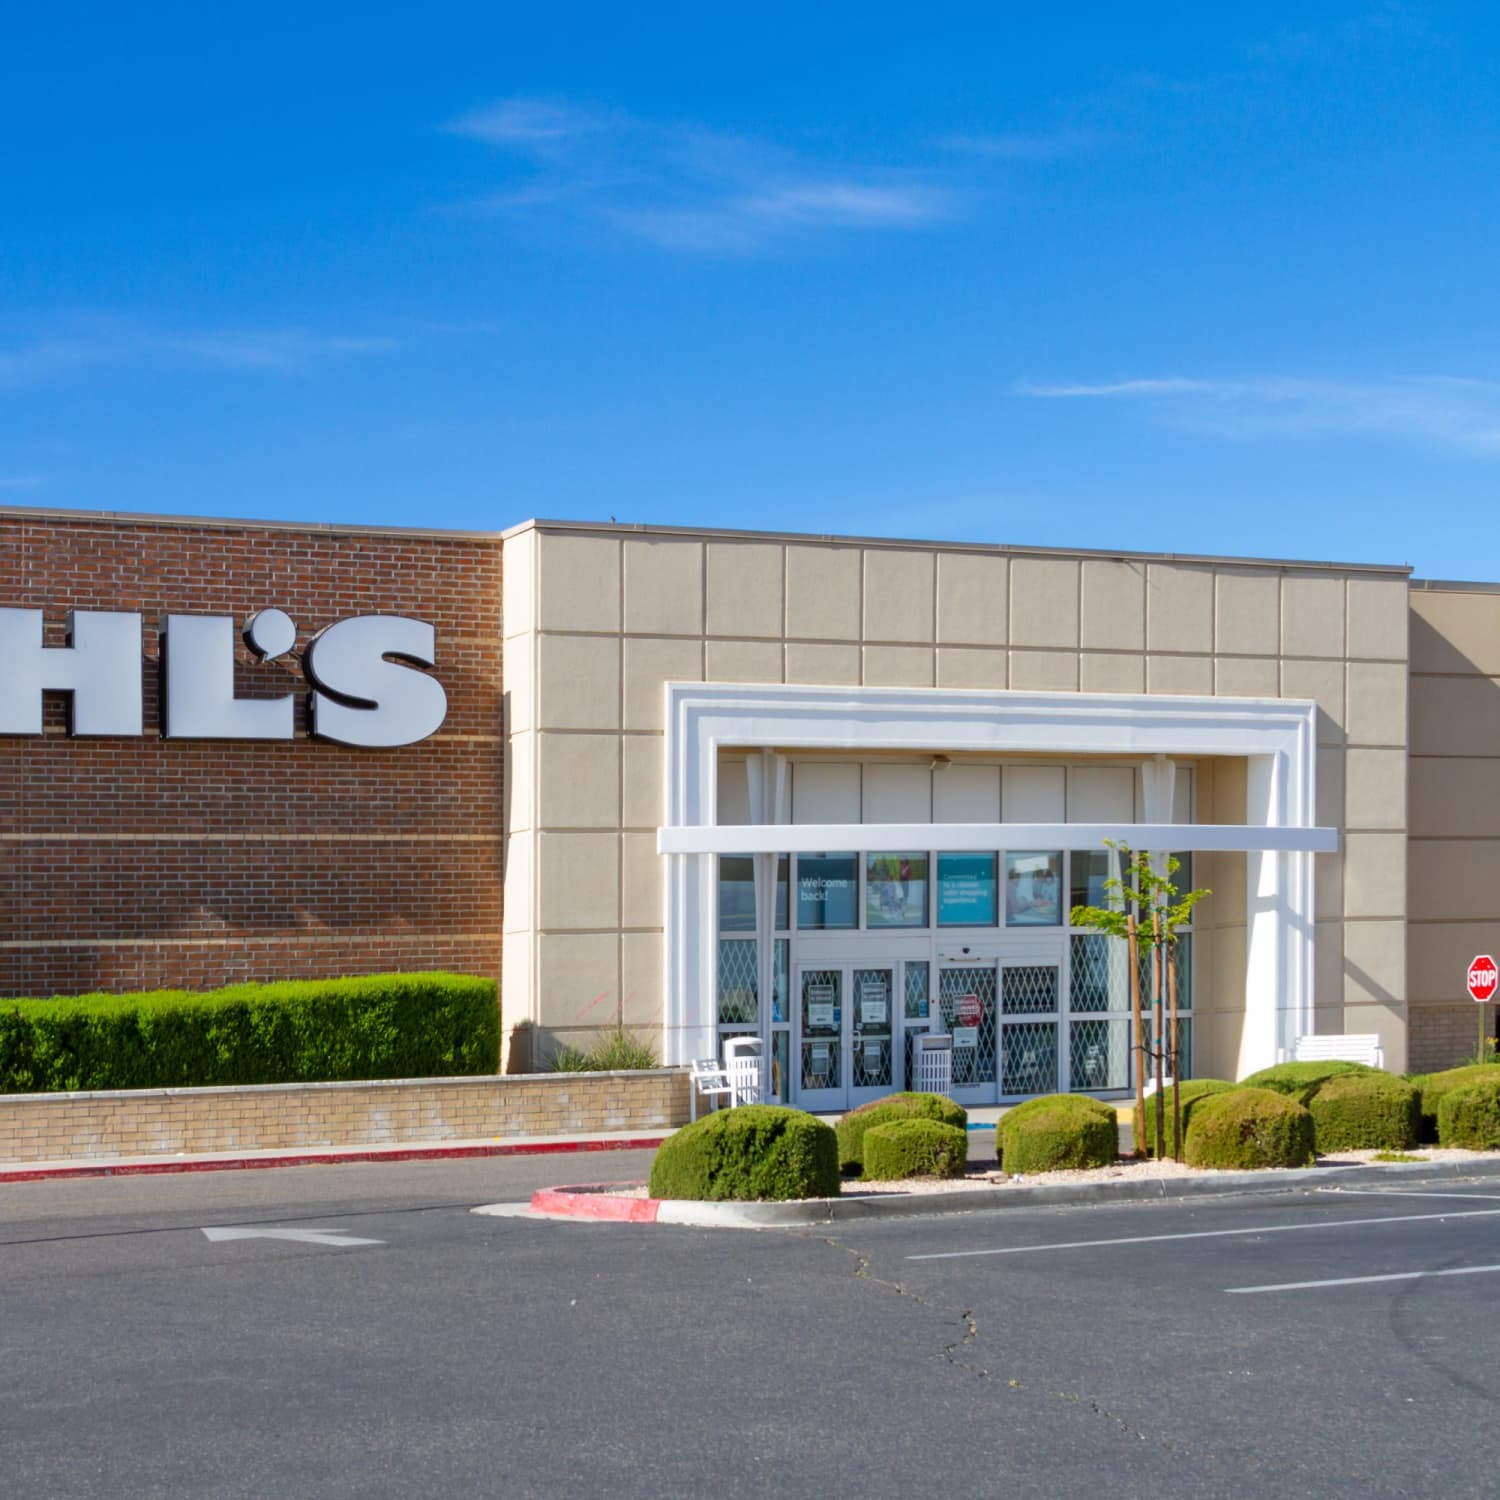 Kohl's Makes a Smaller, Mightier Store Part of the Omnichannel